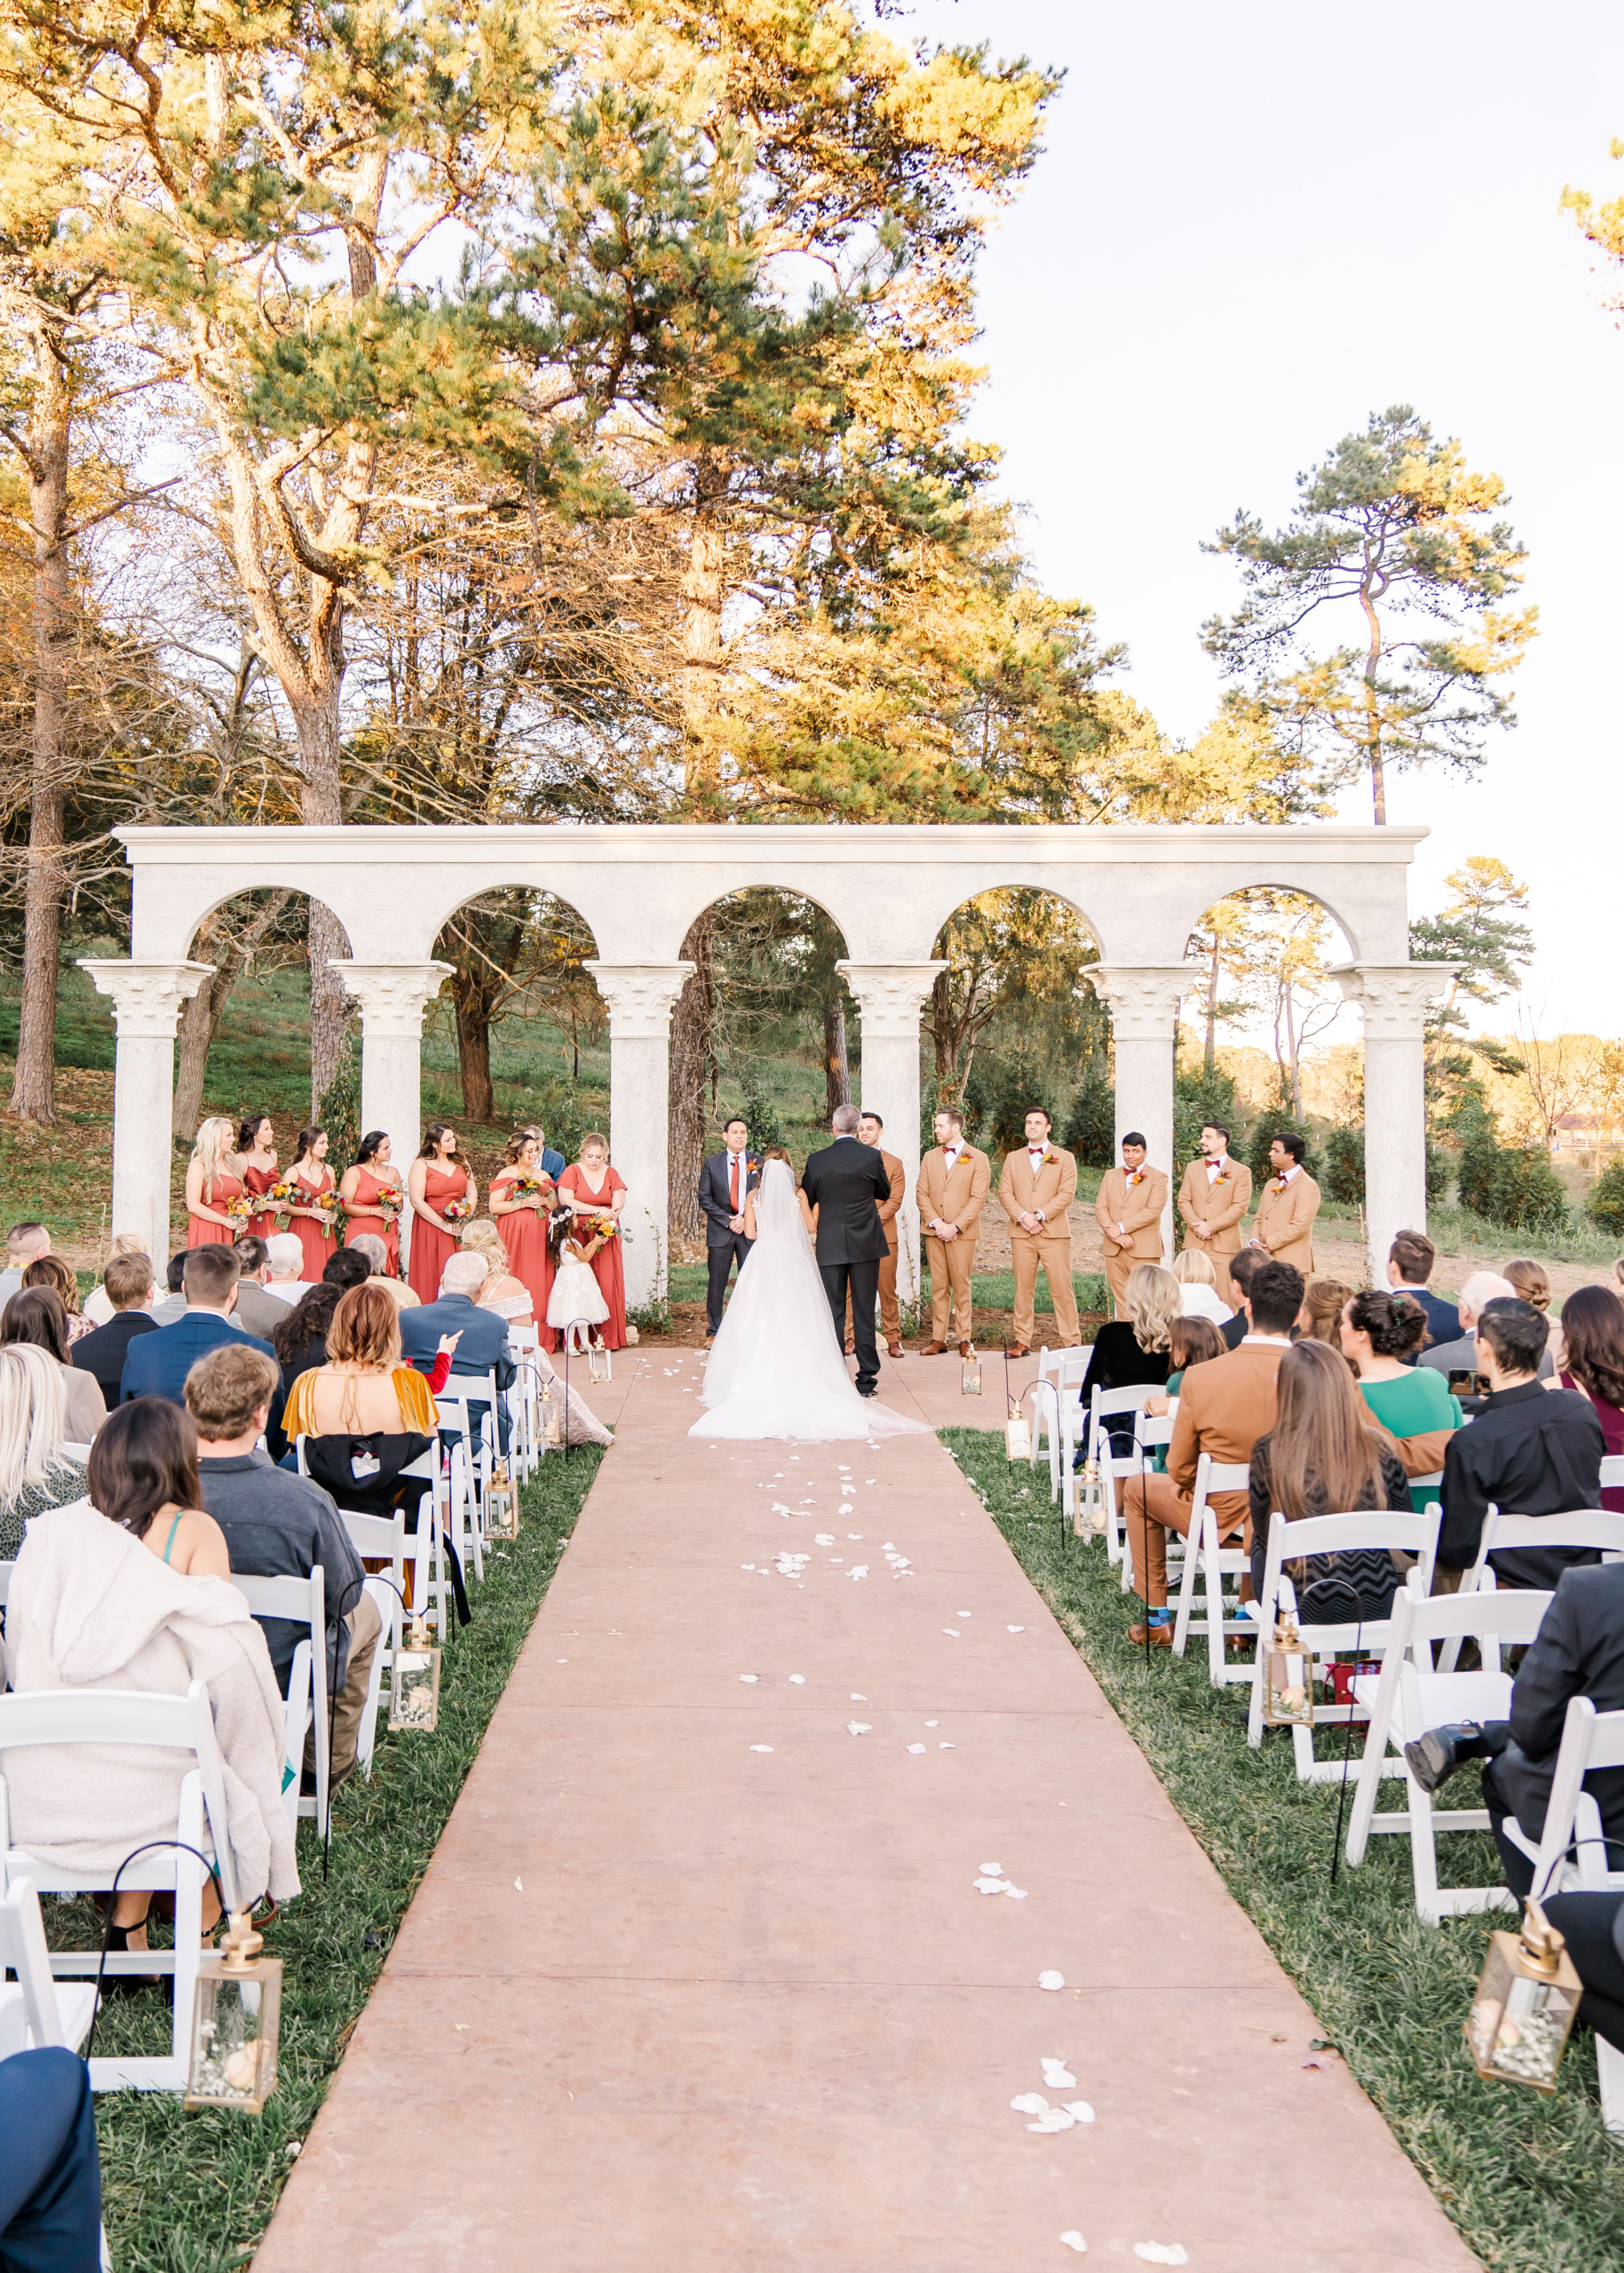 The Woodlands at Howe Farms Ceremony 